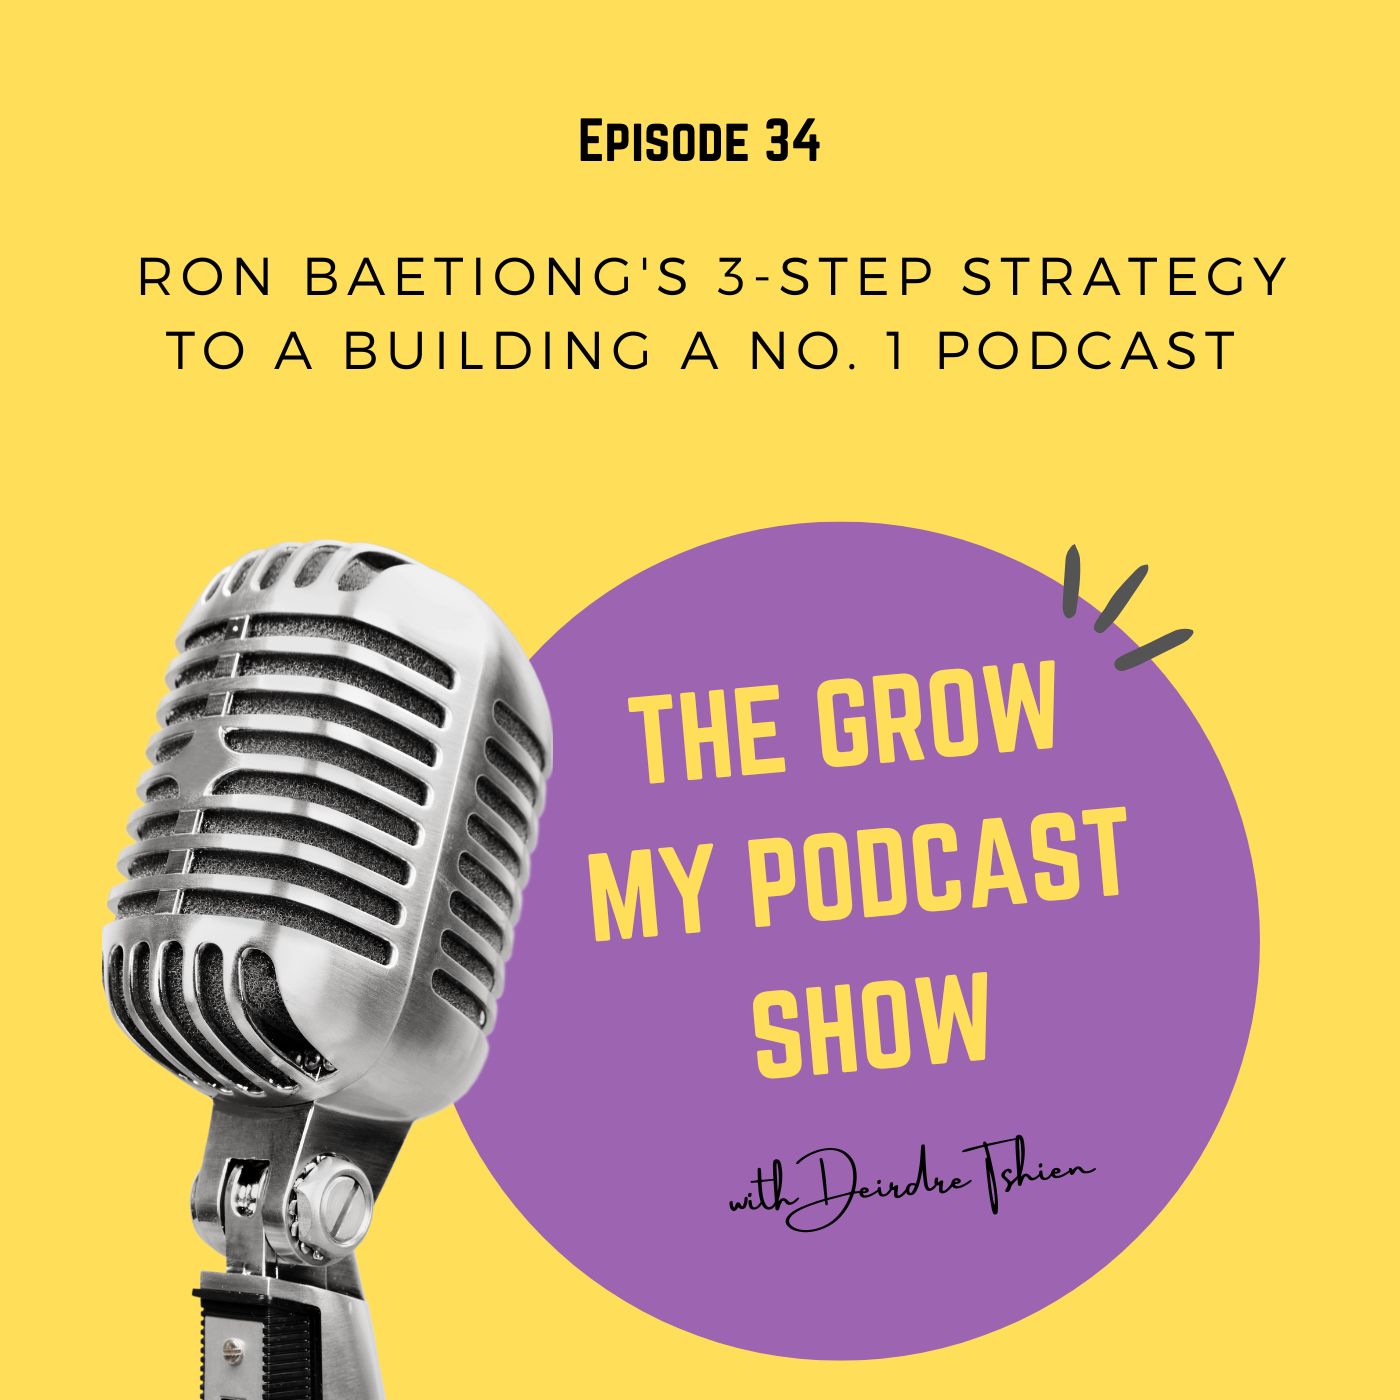 34. Ron Baetiong's 3-Step Strategy to a Building a No. 1 Podcast Image